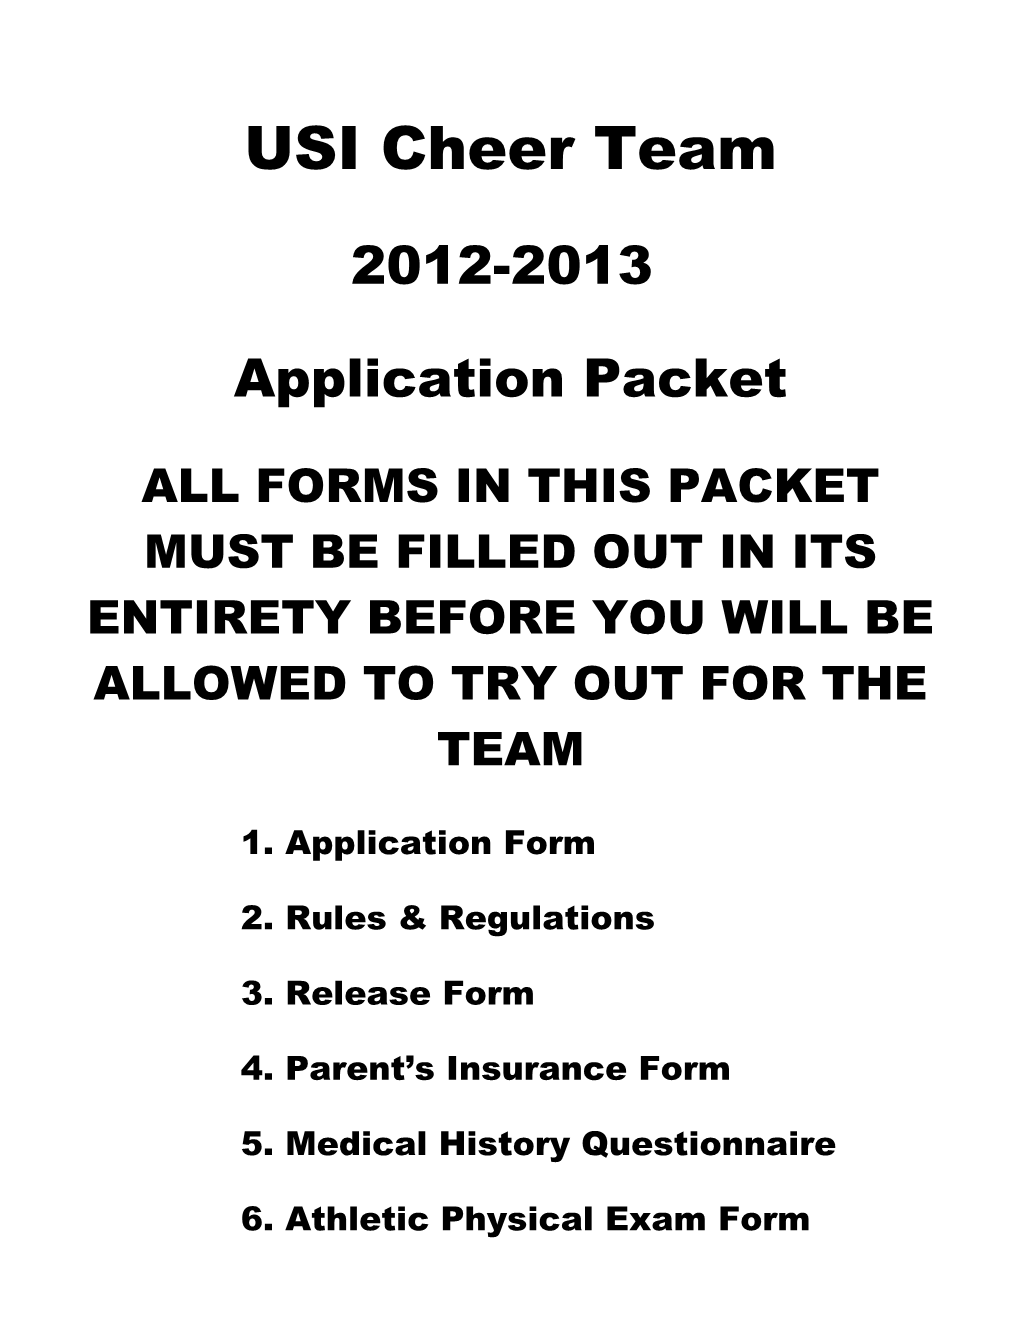 Application Packet s1